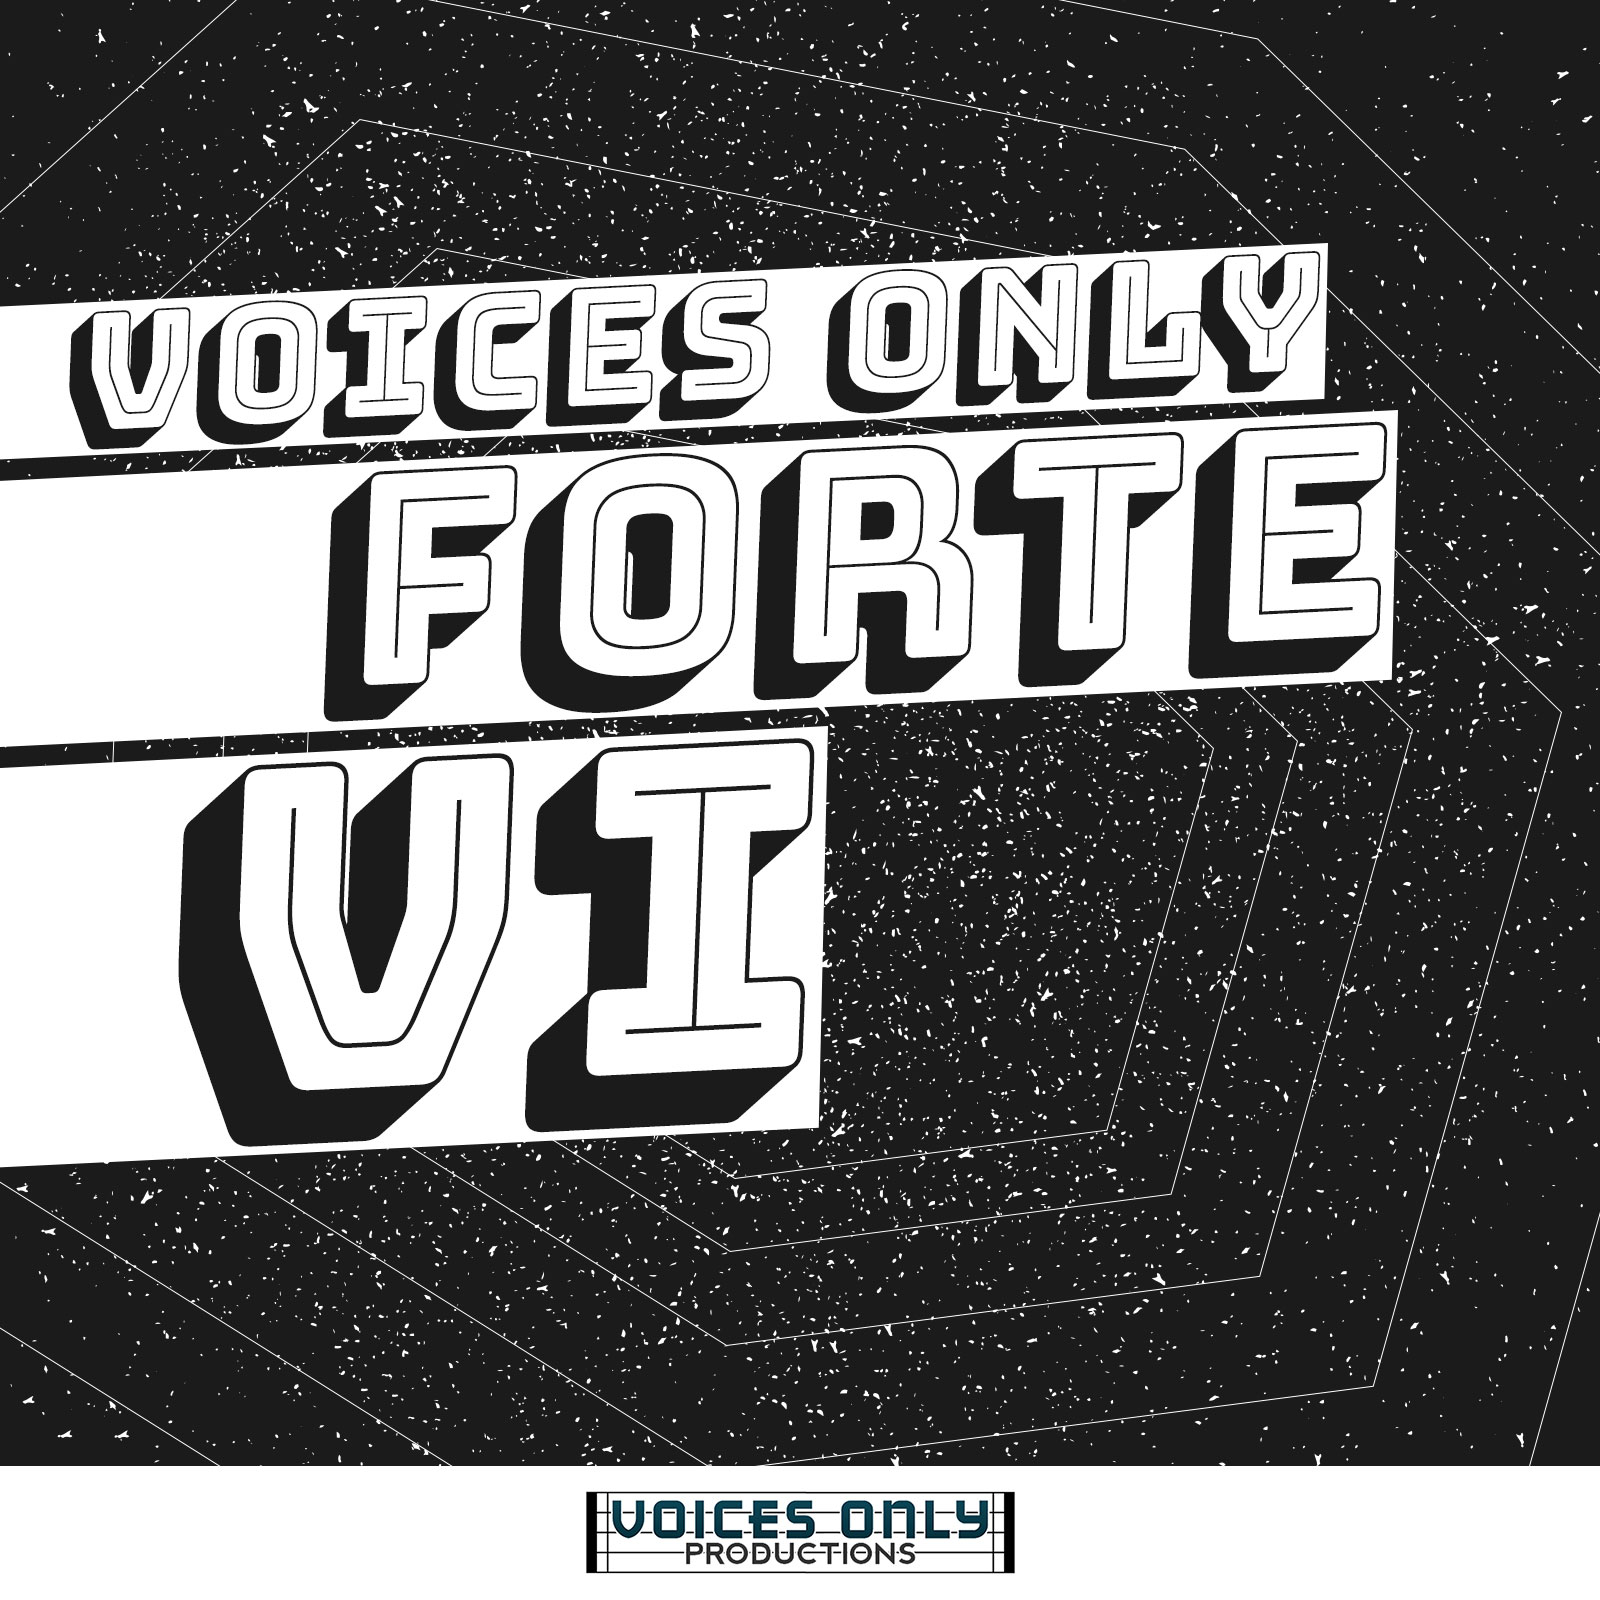 Voices Only Forte VI